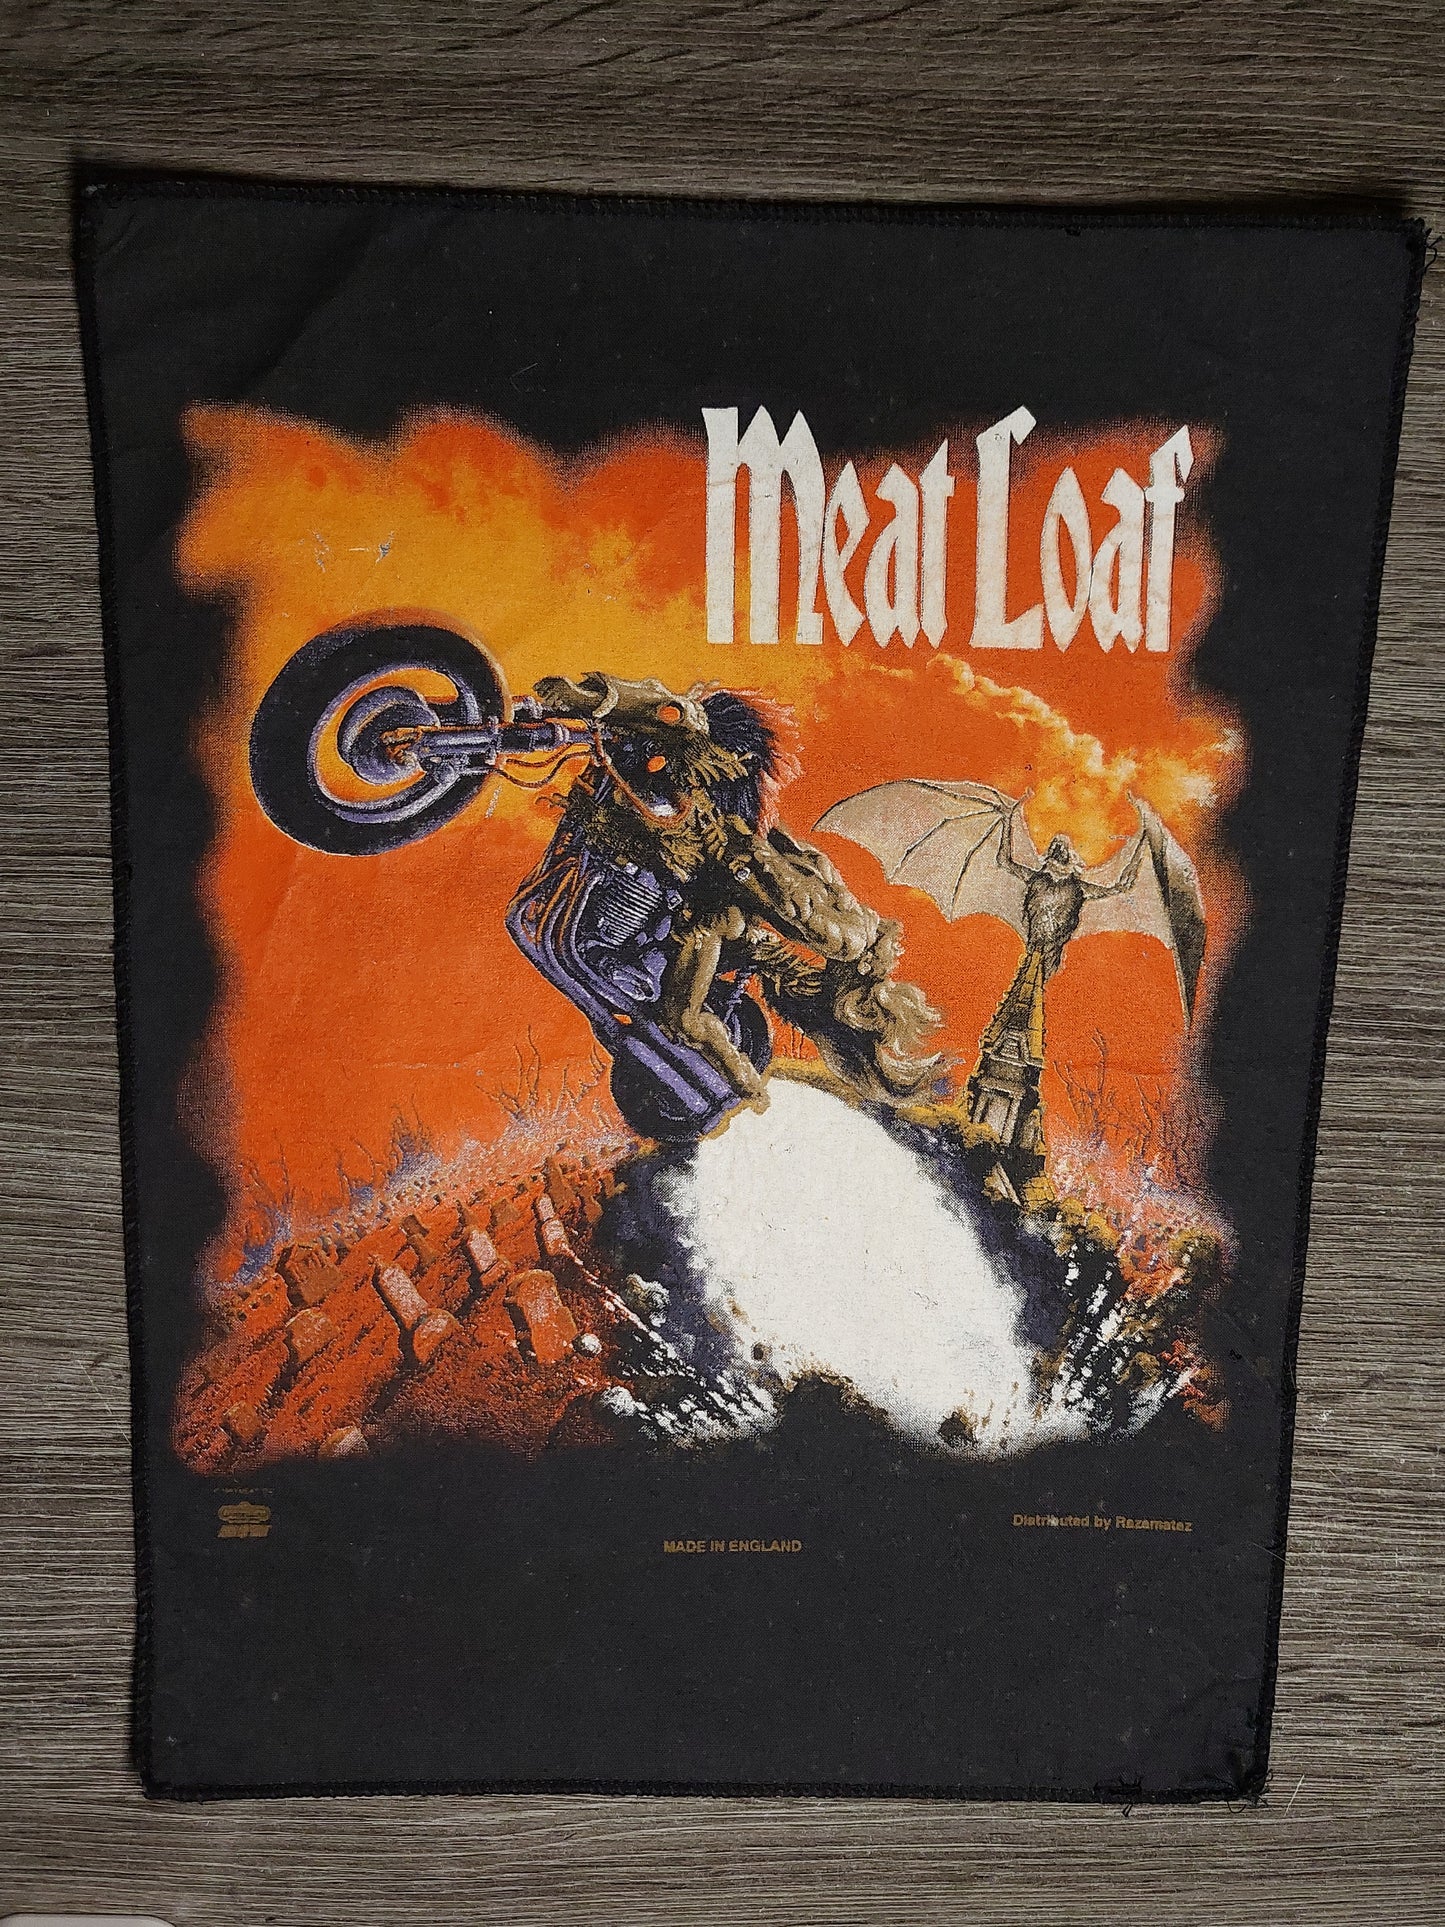 Meat loaf - Bat out of hell backpatch